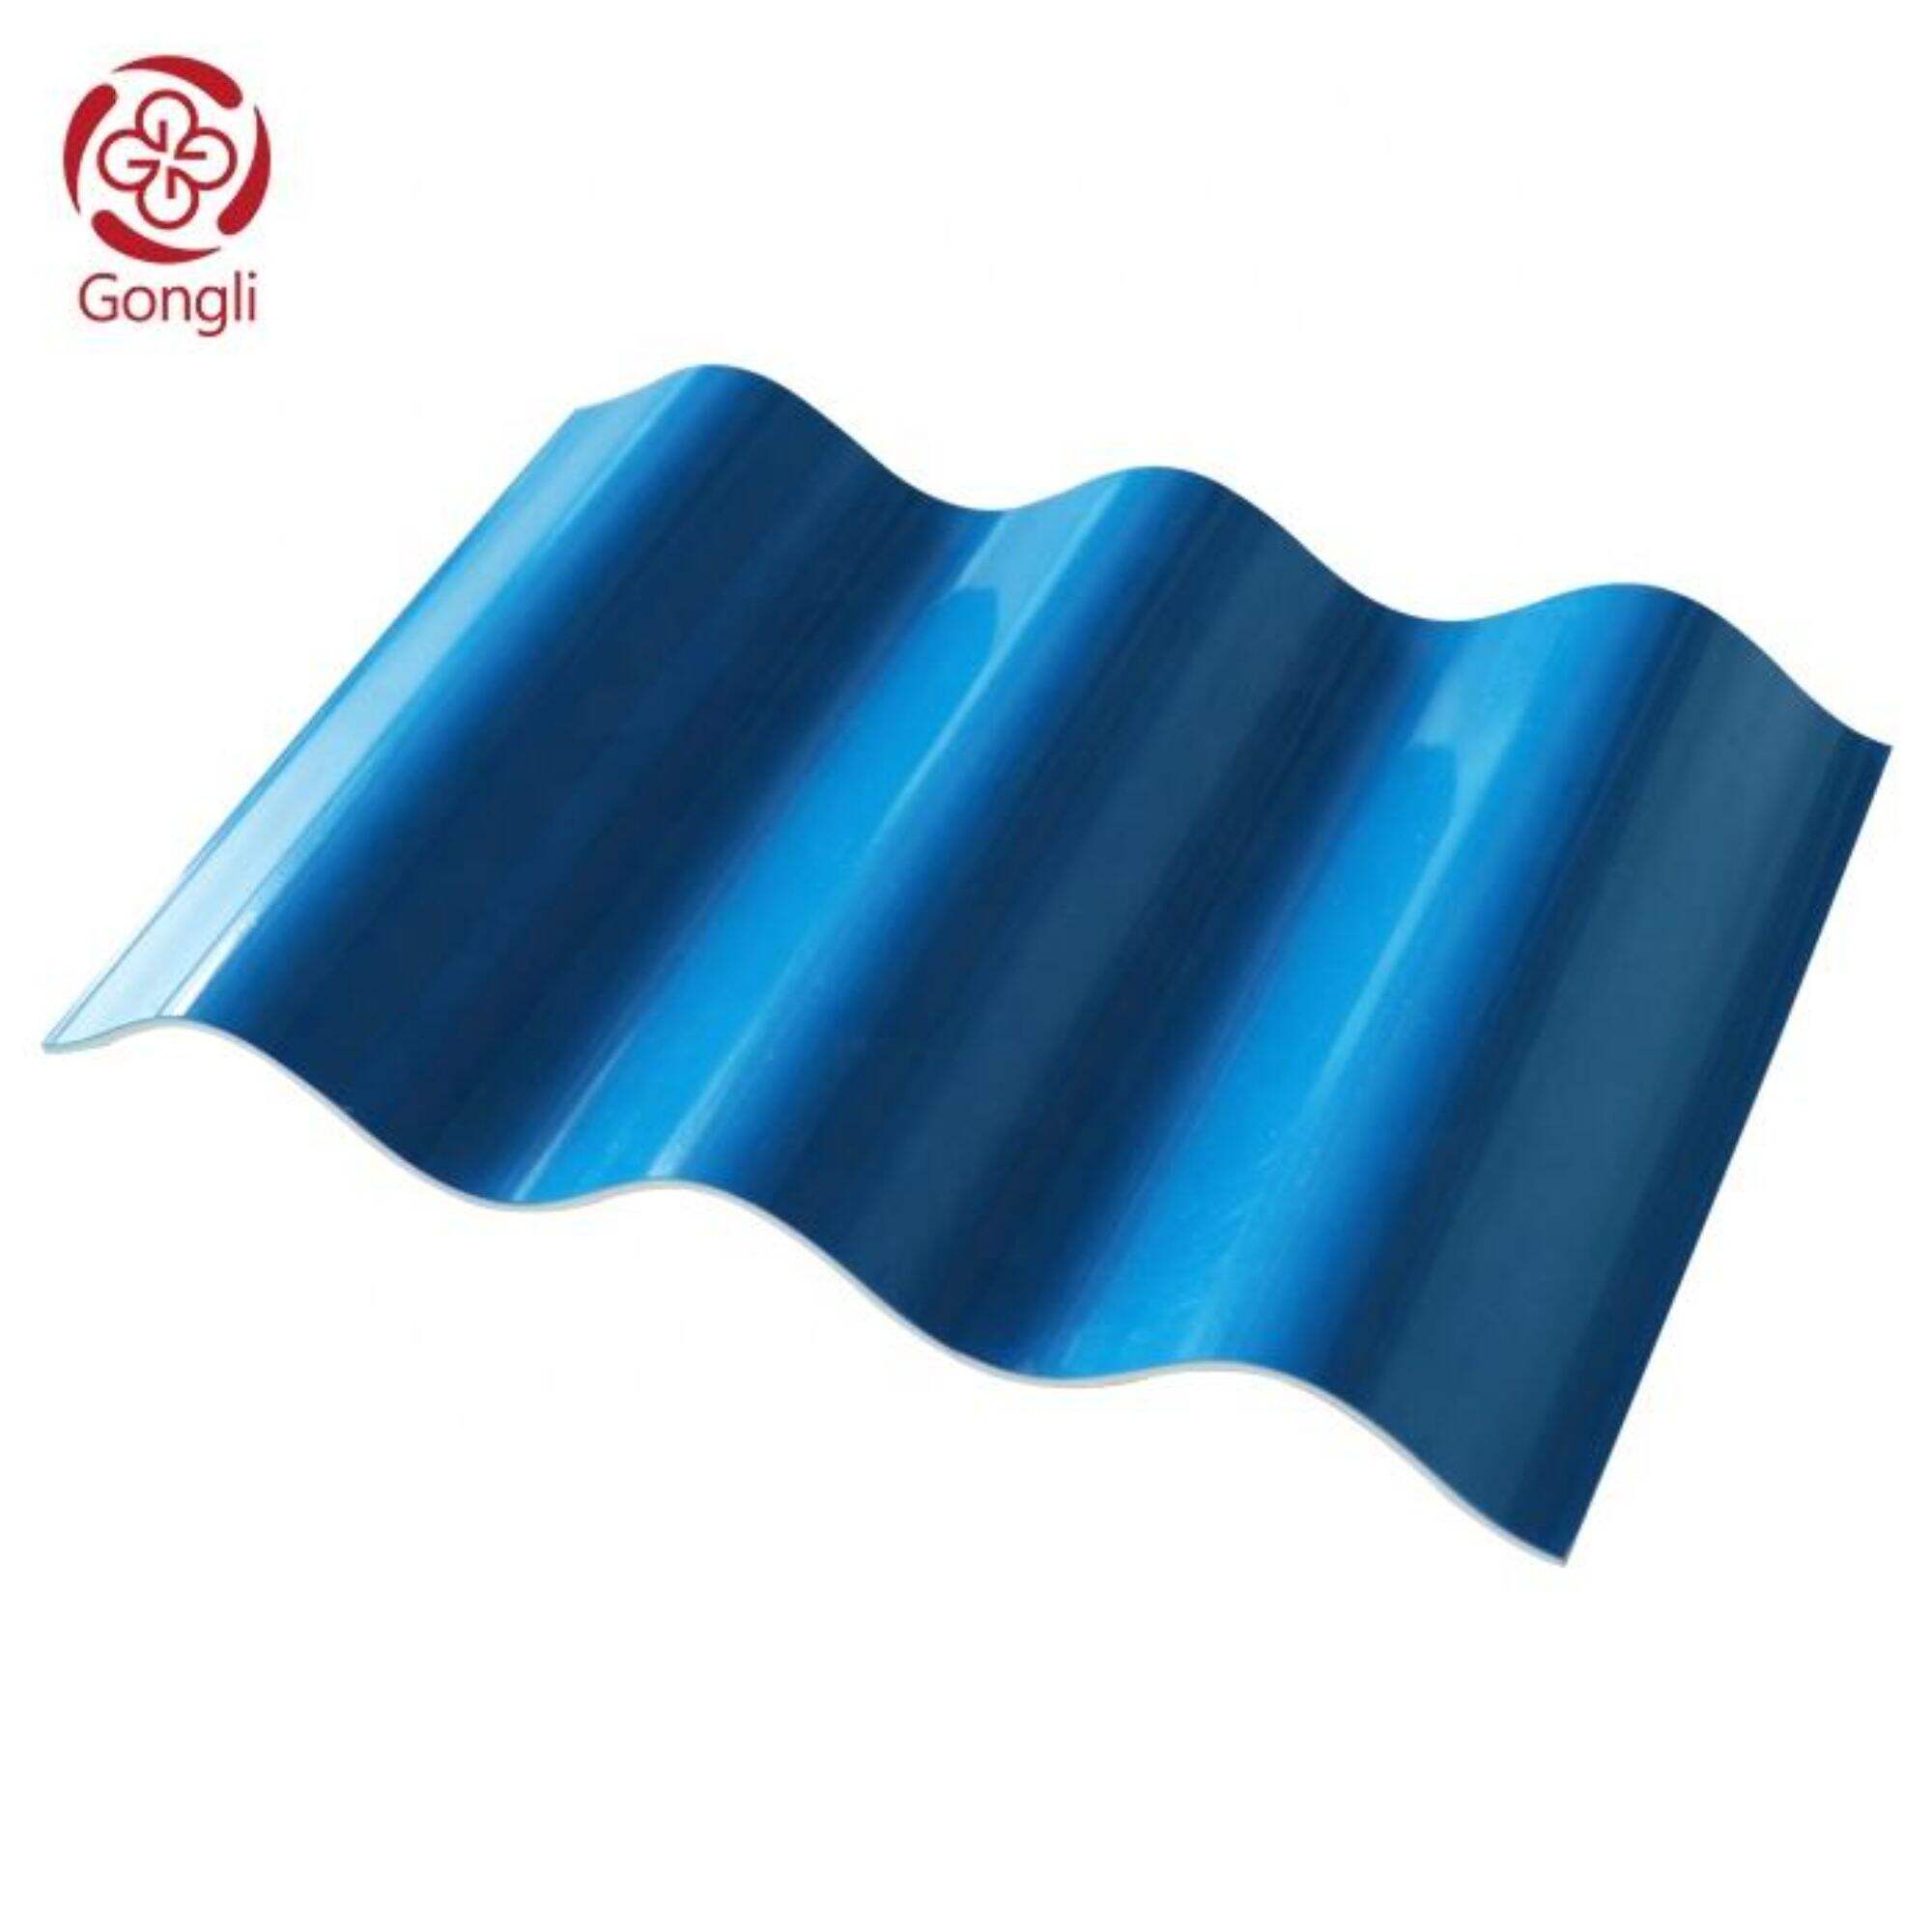 High-quality Corrugated Roofing Sheets - Durable Hollow Design for Kerala Homes, Clear & Impact-resistant Plastic Tiles, Ideal for Outdoor Coverings